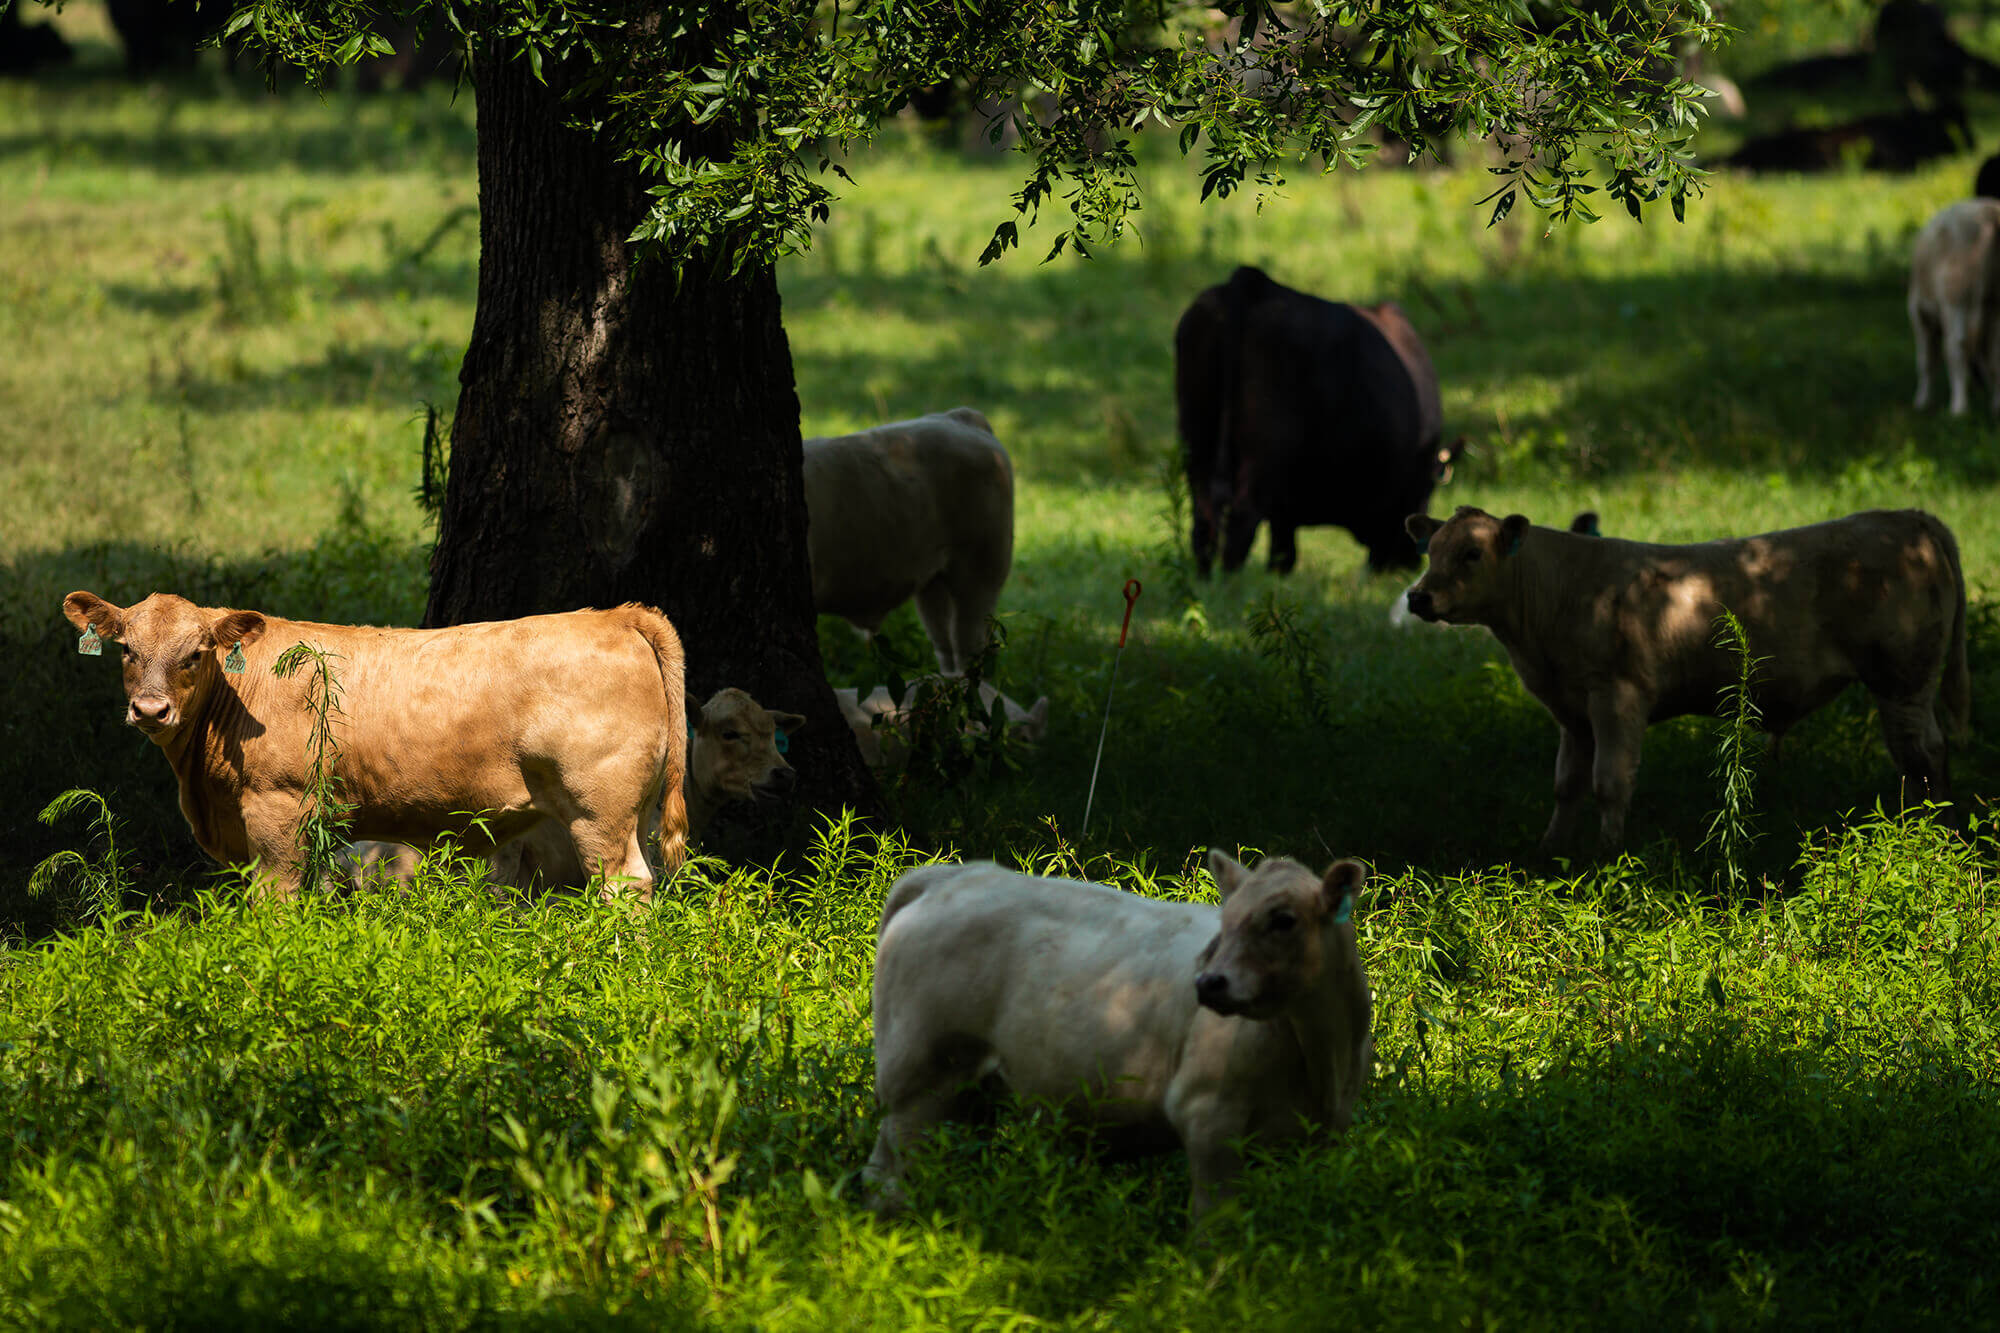 Cattle grazing in shade under trees